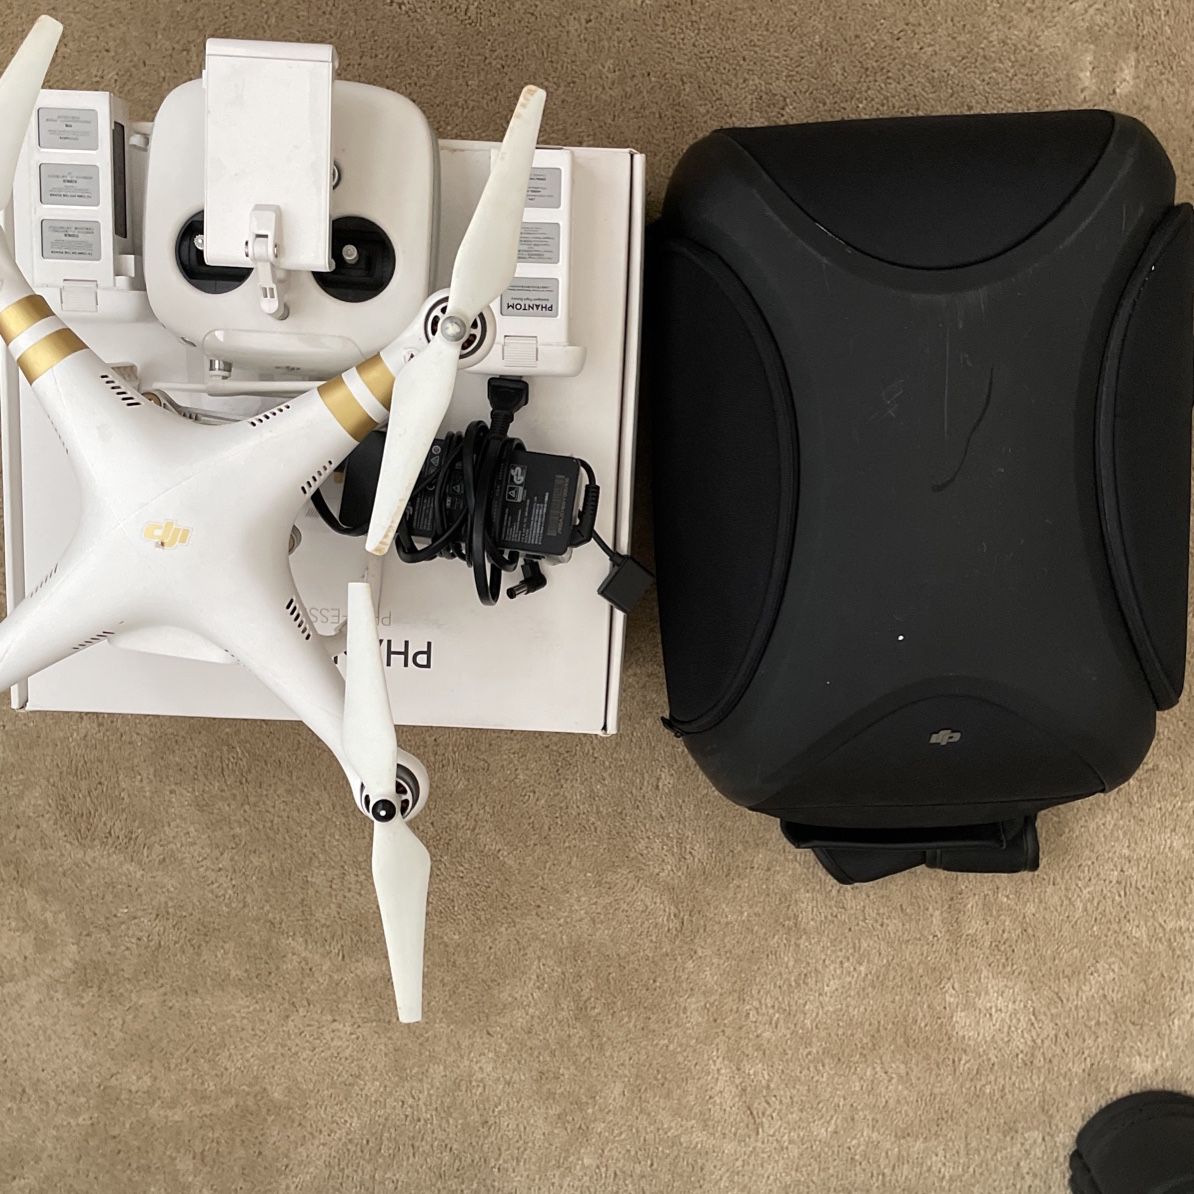 Phantom 3 Pro Drone With Carrying Bag + Extra Battery